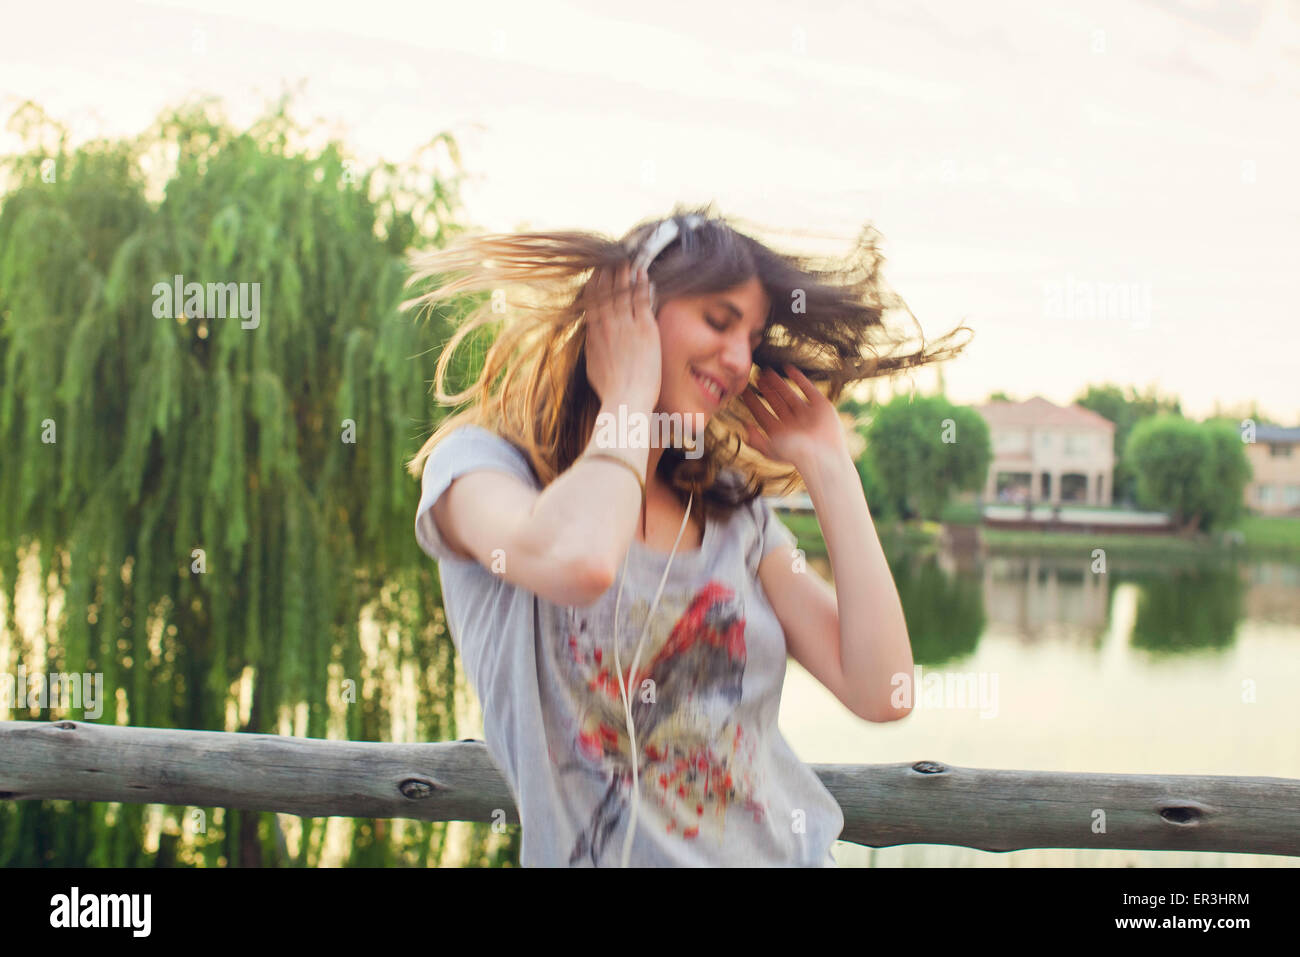 Young woman enthusiatically listening to music Stock Photo